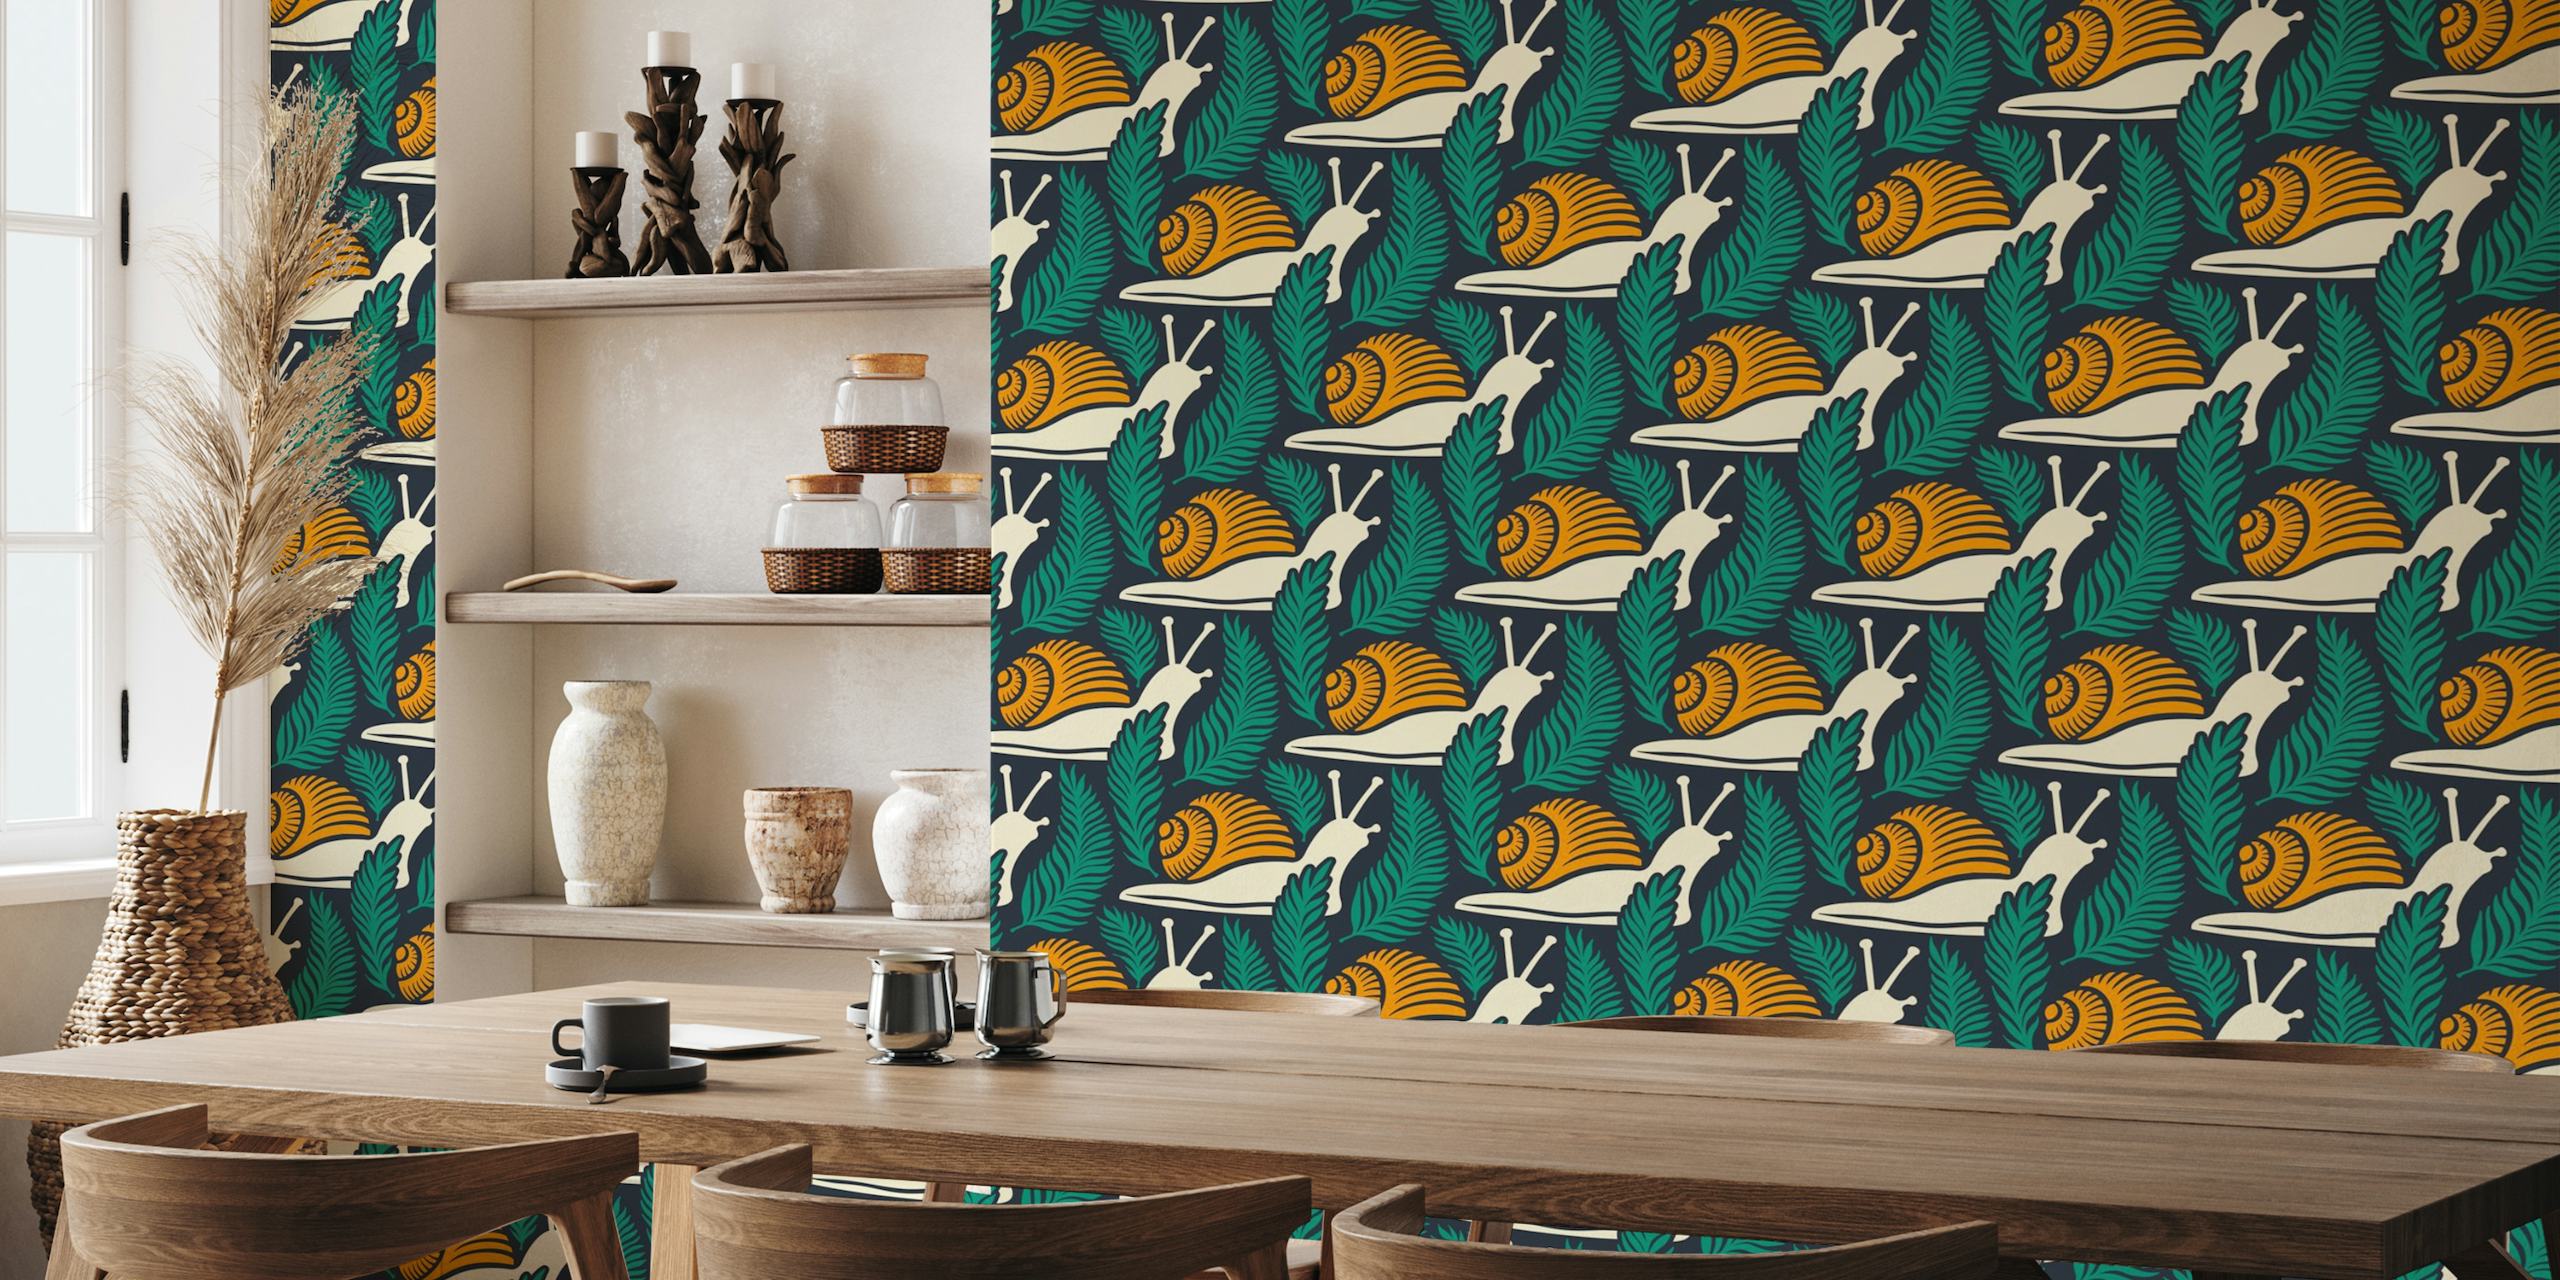 Snails in ferns, teal yellow / 3001 A tapety